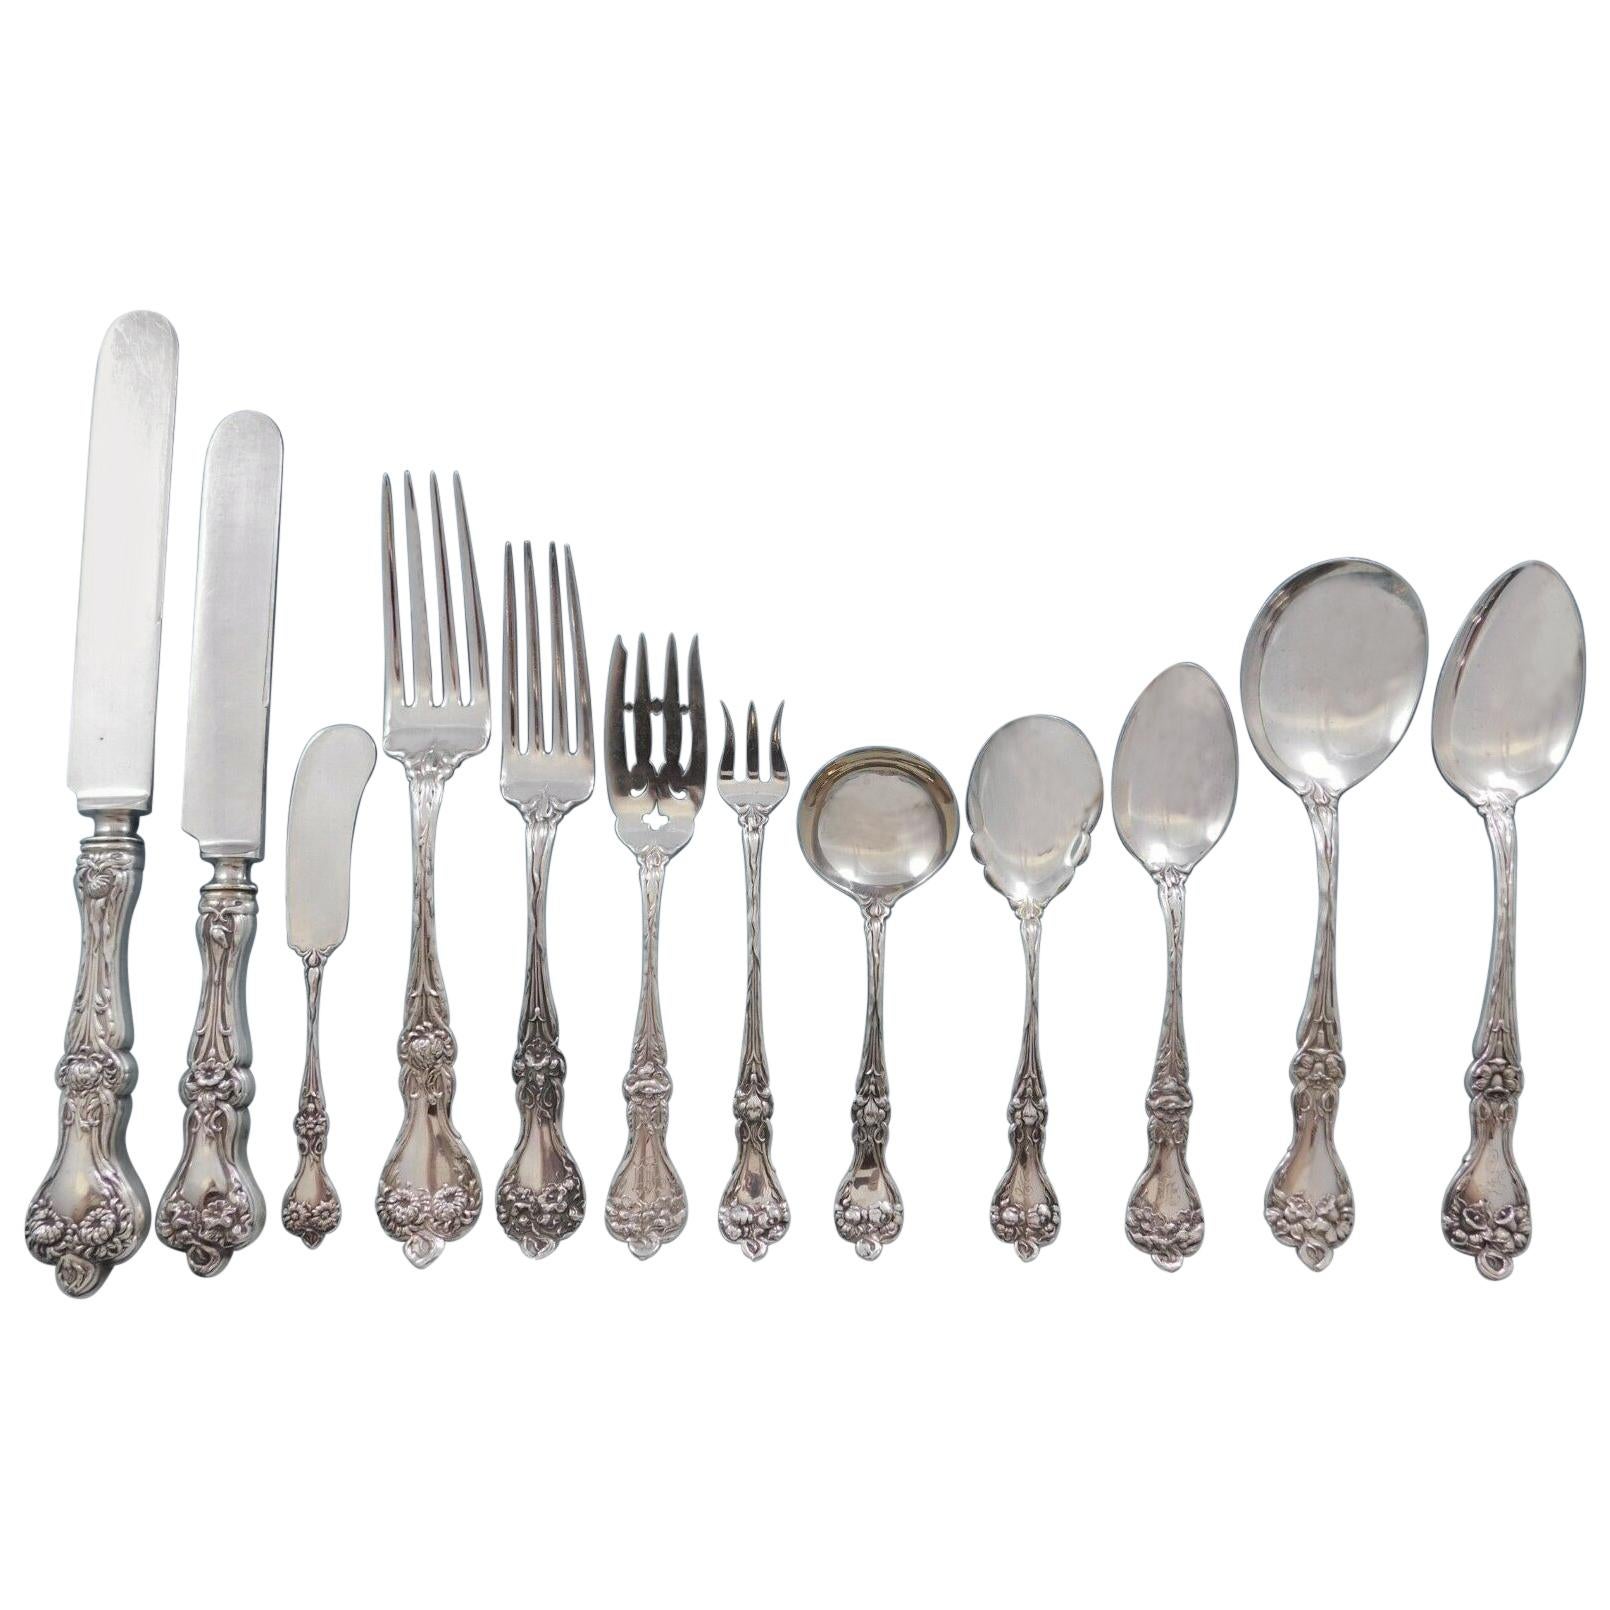 Majestic by Alvin Sterling Silver Flatware Set for 12 Dinner Service 167 Pieces